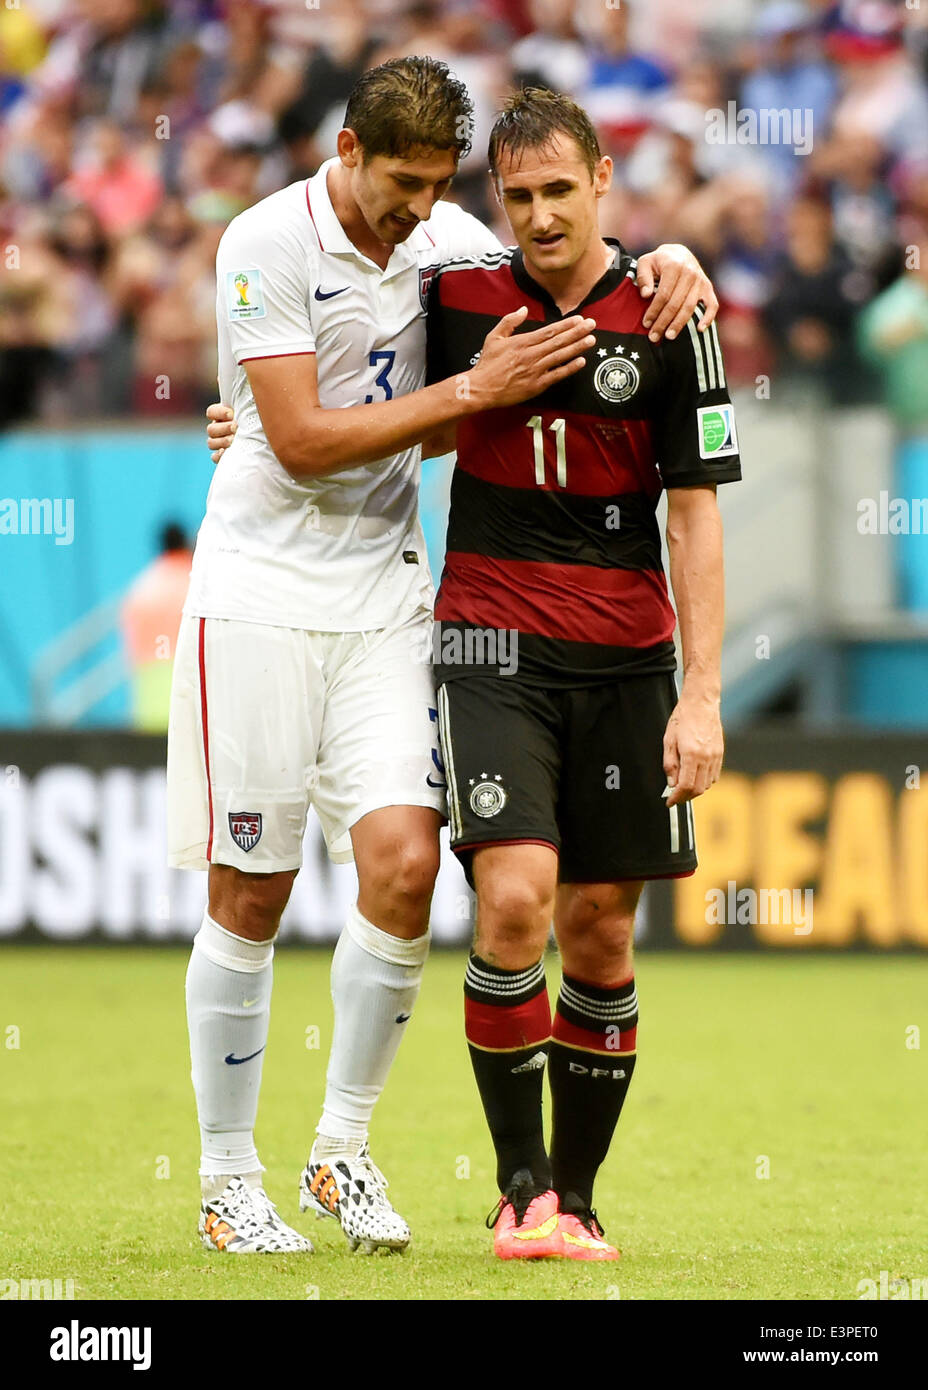 Recife, Brazil. 26th June, 2014. Omar Gonzalez of the U.S. (L) talks with Germany's Miroslav Klose after a Group G match between the U.S. and Germany of 2014 FIFA World Cup at the Arena Pernambuco Stadium in Recife, Brazil, on June 26, 2014. Germany won 1-0 over the U.S. on Thursday. Germany and the U.S. enter Round of 16 from Group G. Credit:  Guo Yong/Xinhua/Alamy Live News Stock Photo